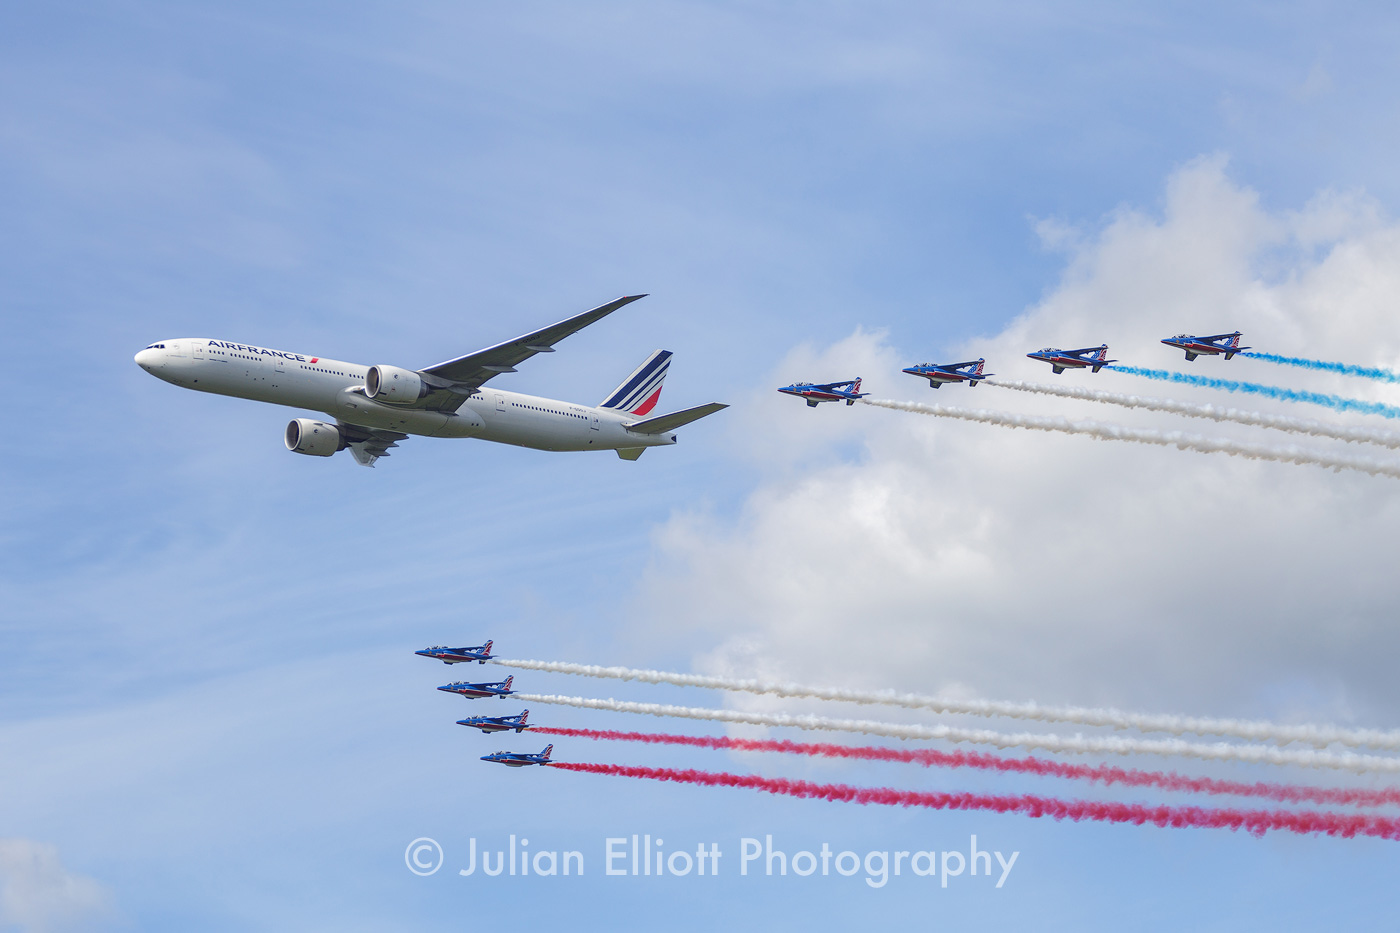 Air France 777 in formation with the jets from the Patrouille de France